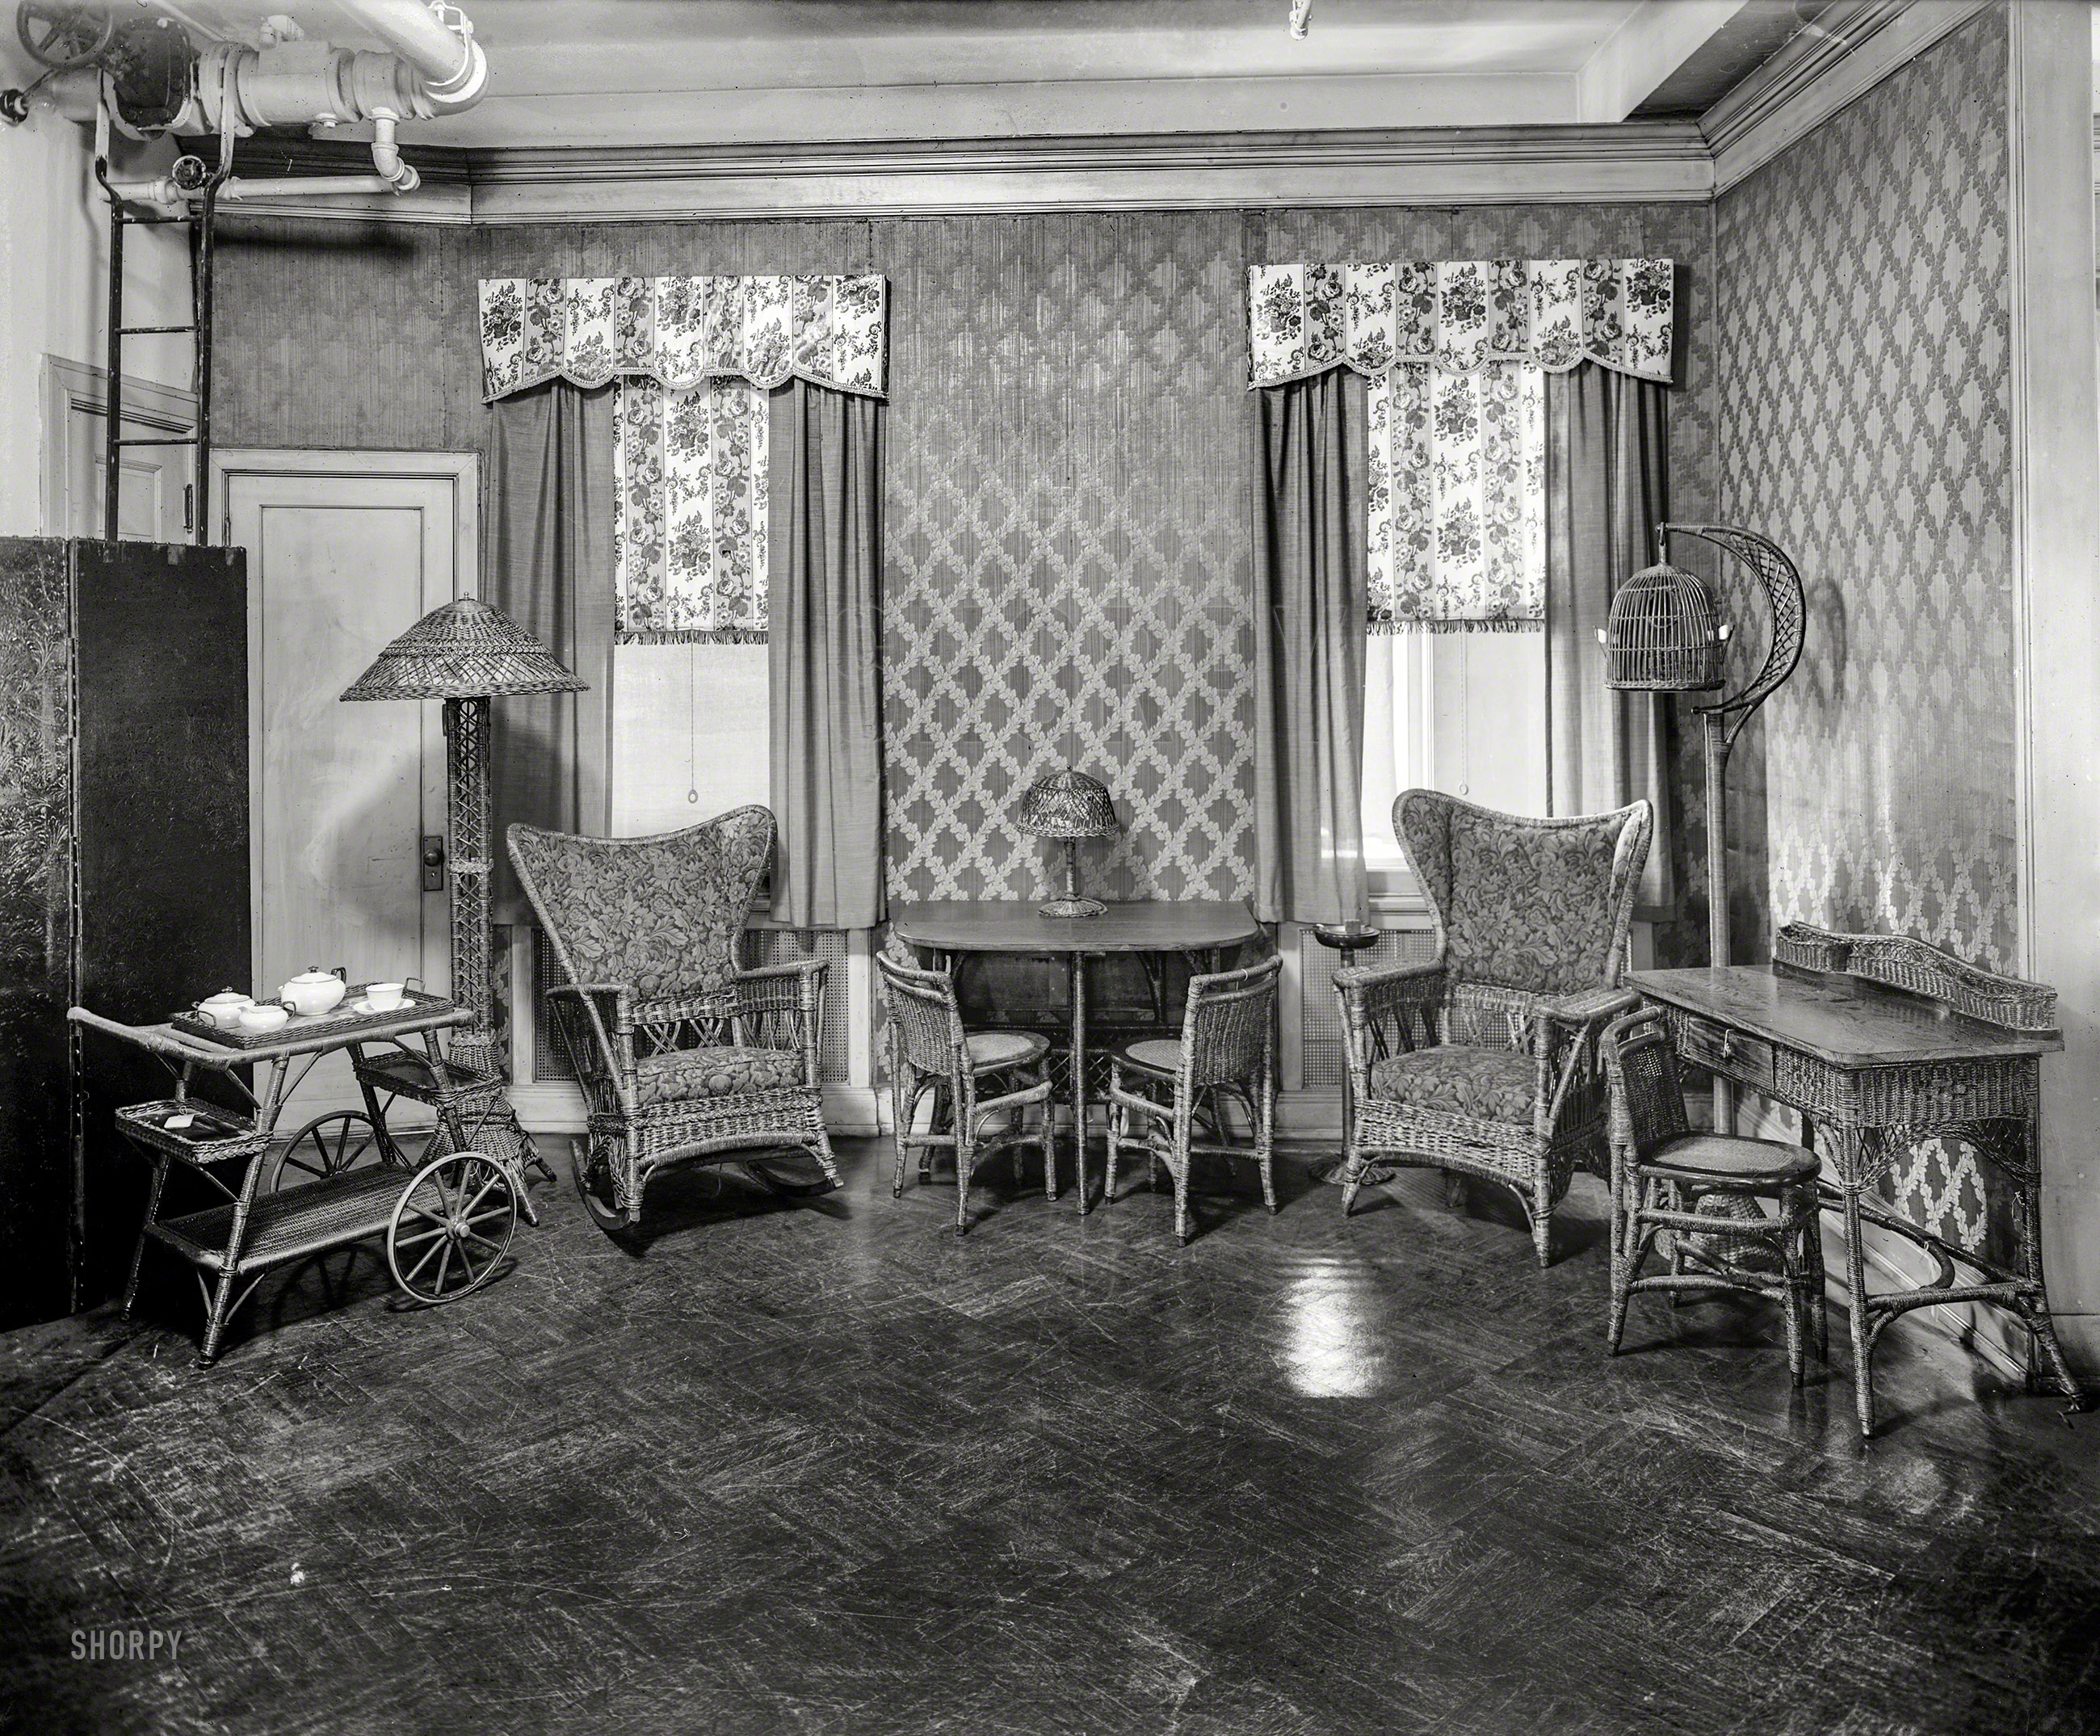 Washington, D.C., circa 1922. "American Forestry Association." Something wicker this way comes. National Photo Company glass negative. View full size.